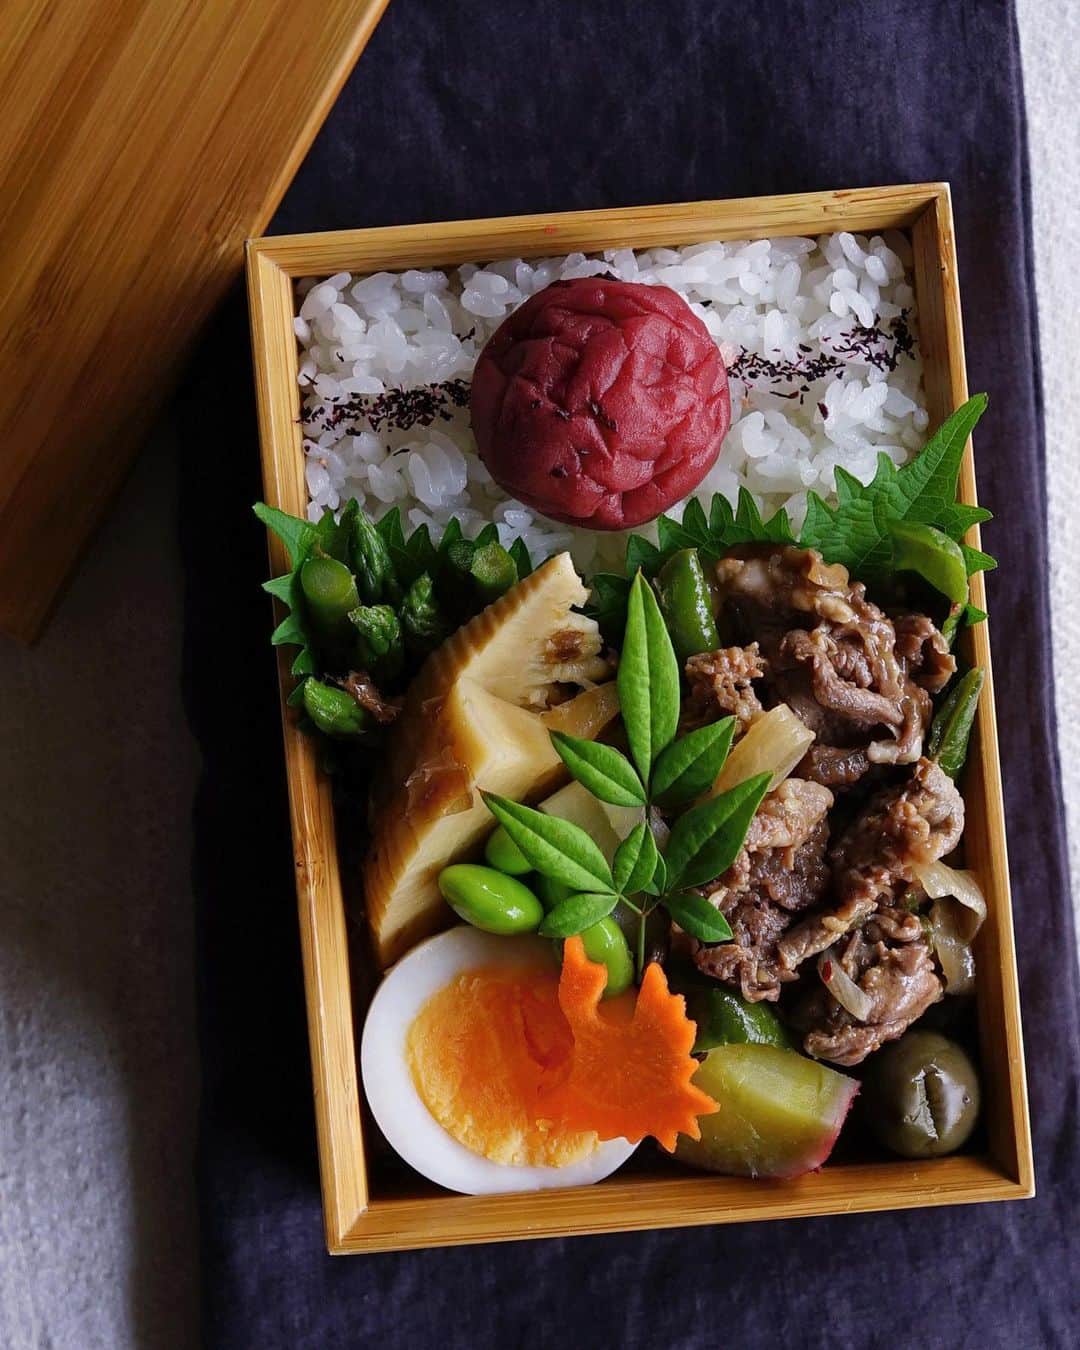 Ryoko Yunokiのインスタグラム：「+ + + Soy-glazed beef bento/牛肉の時雨煮弁当 . *rice ane umeboshi *soy-glazed beef with onion *dashi-simmered bamboo shoots and asparagus *hard-boiled egg *honey-simmered sweet potato with butter *green olive . ＊ご飯と梅干し ＊牛肉の時雨煮 ＊筍とアスパラガスの出汁煮 ＊ゆで卵 ＊薩摩芋の蜂蜜バター煮 ＊グリーンオリーブ + + + #bento #お弁当 #丸の内弁当 #f52grams #公長齋小菅」